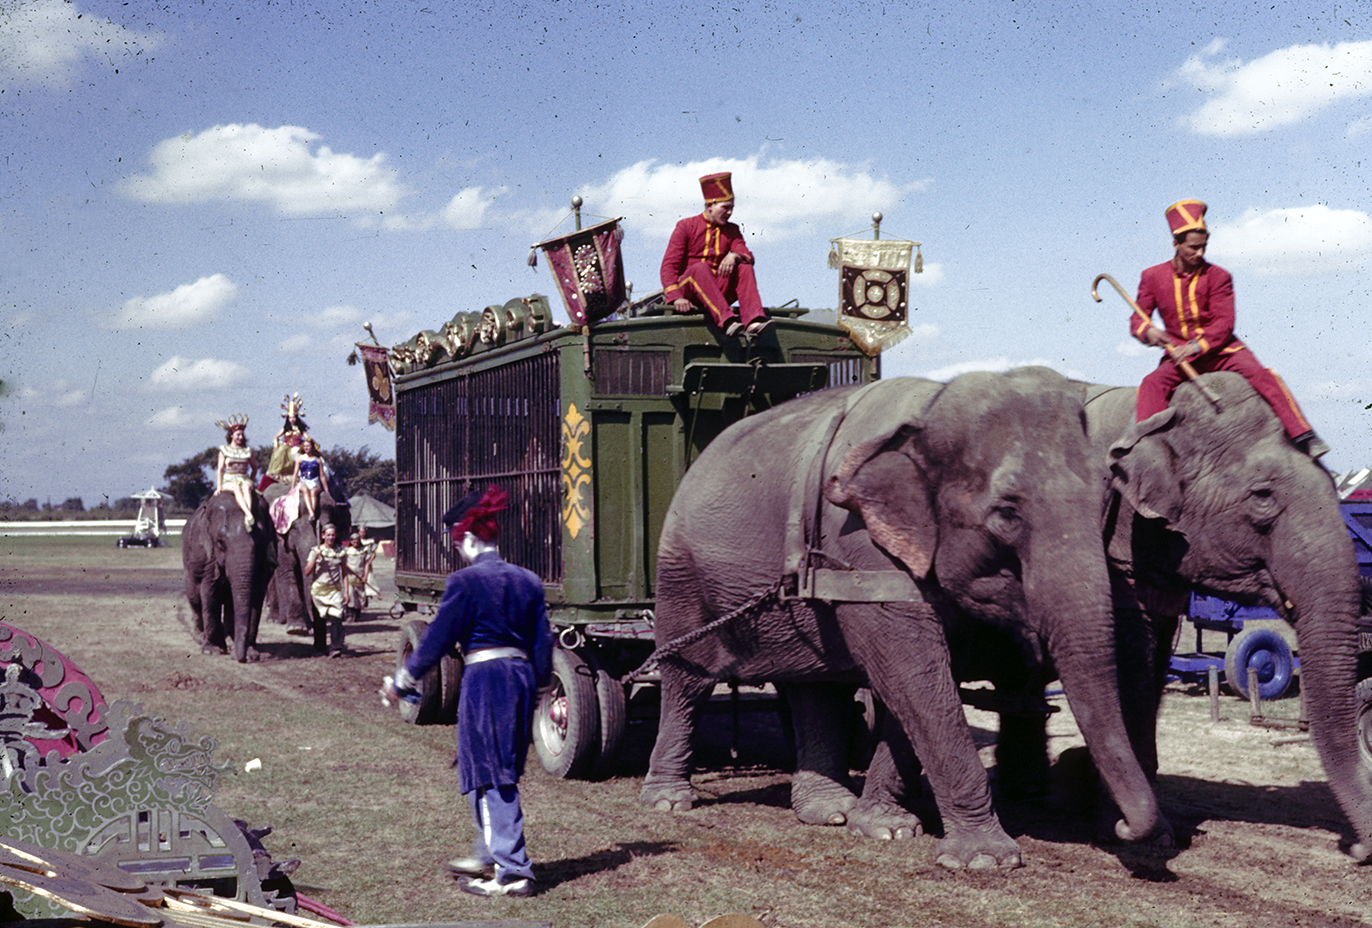 Color image of two elephants pulling green circus cage wagon. Men in red outfits sit atop one elephant and the cage wagon.